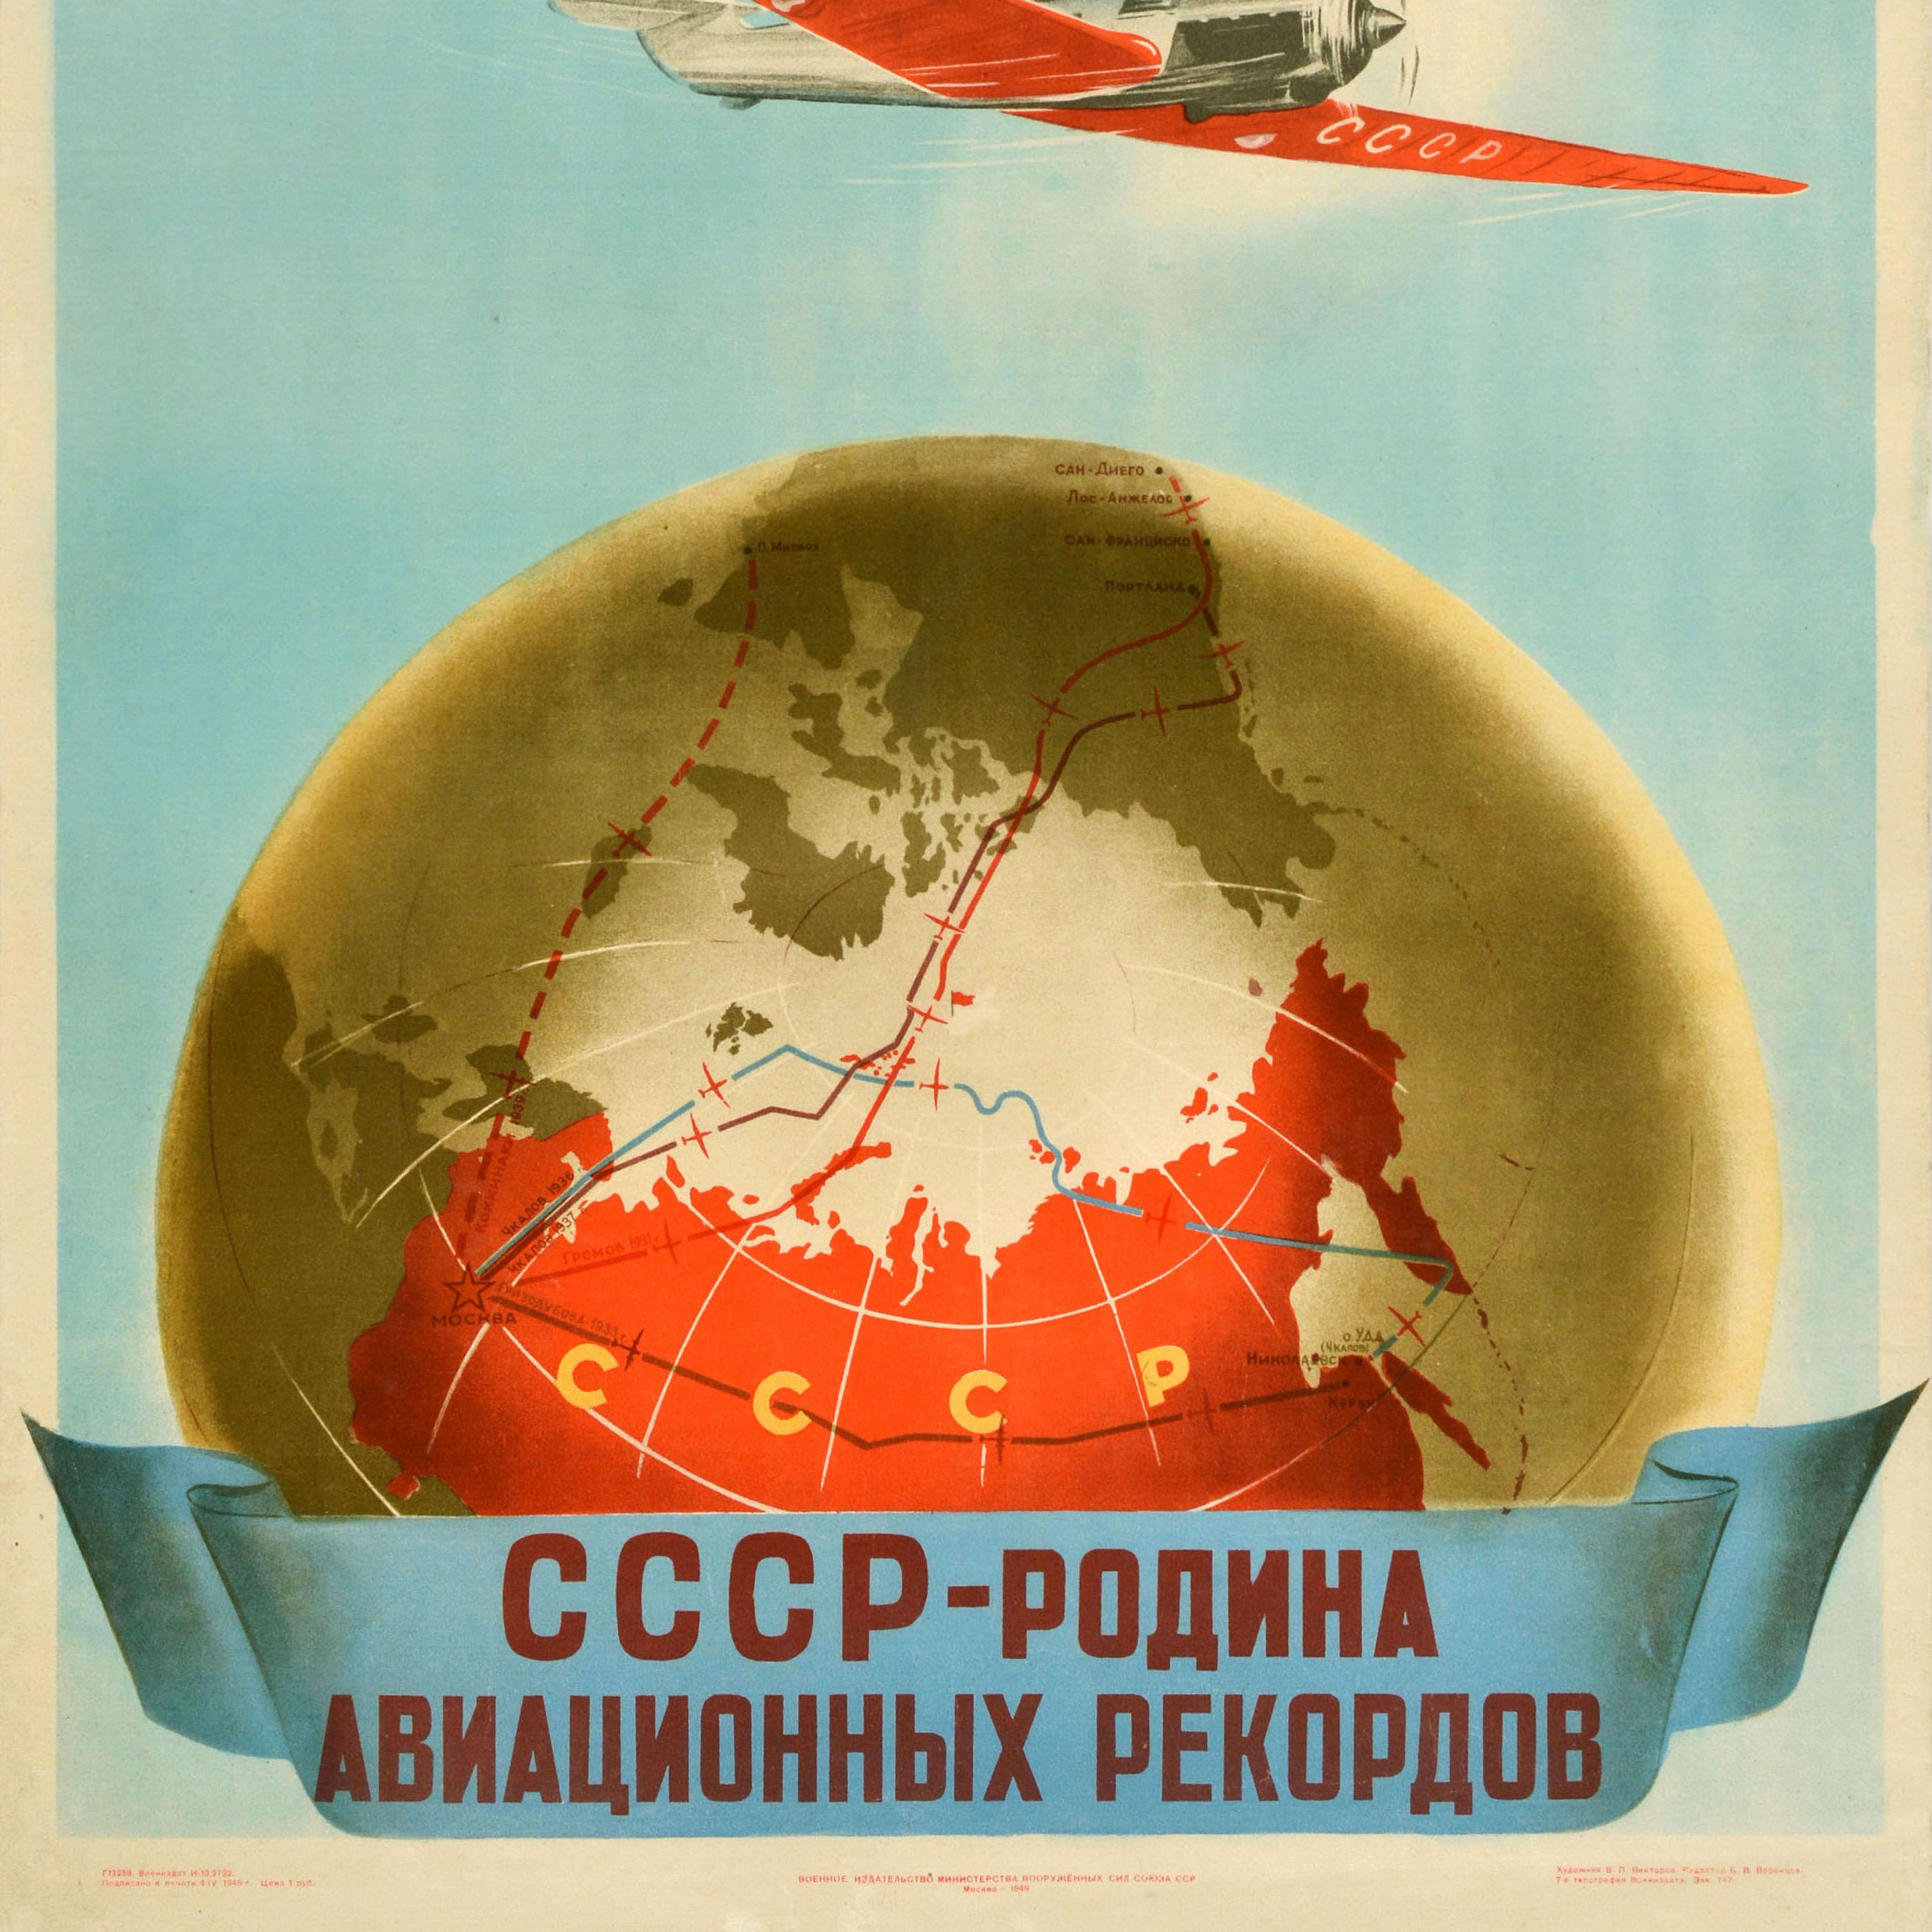 Original Vintage Soviet Propaganda Poster Glory Of Stalin Aviation Records USSR In Good Condition For Sale In London, GB